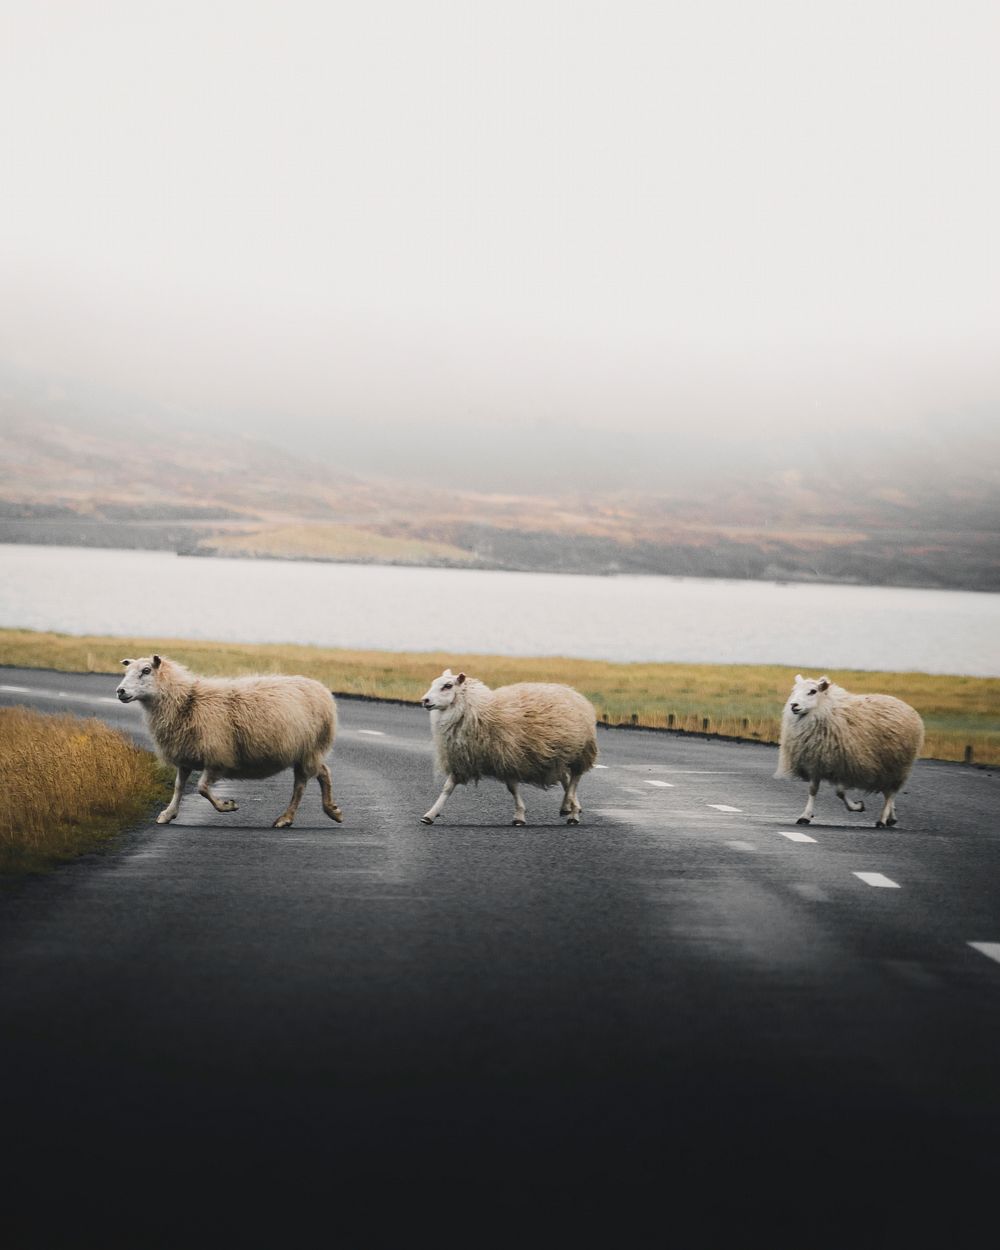 Furry sheep on the move in the Icelandic nature